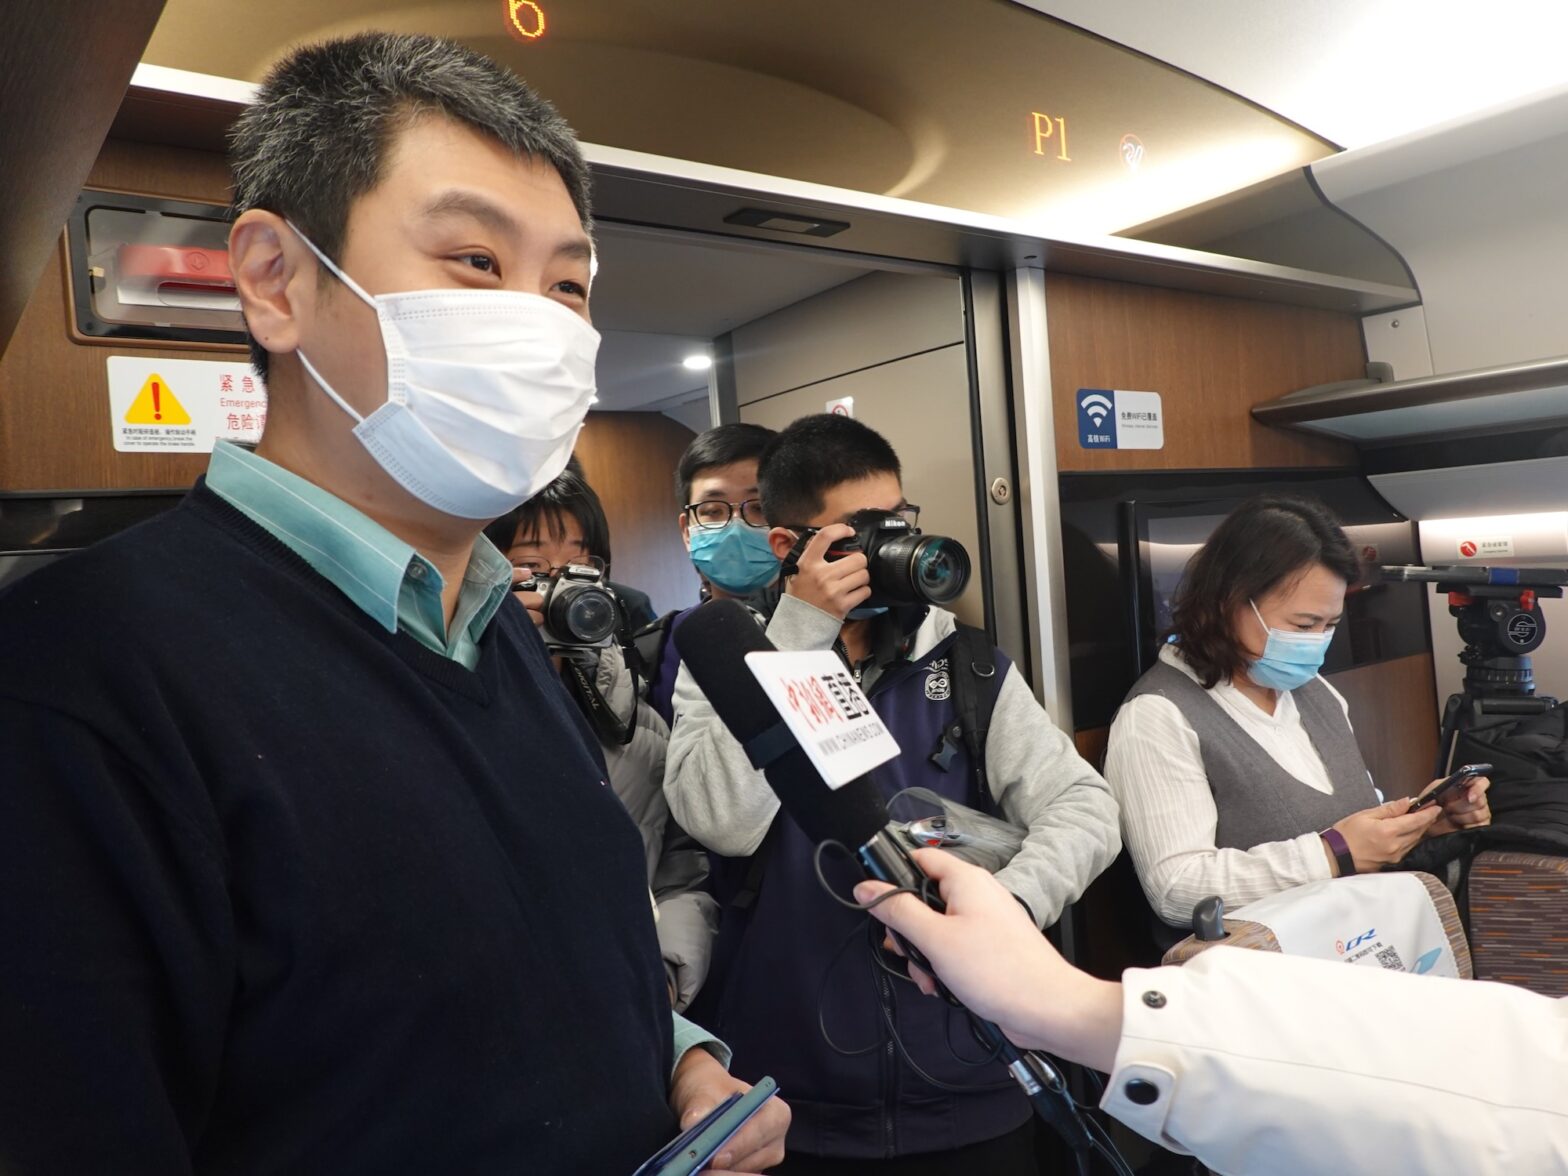 An image of David Feng being interviewed onboard a train